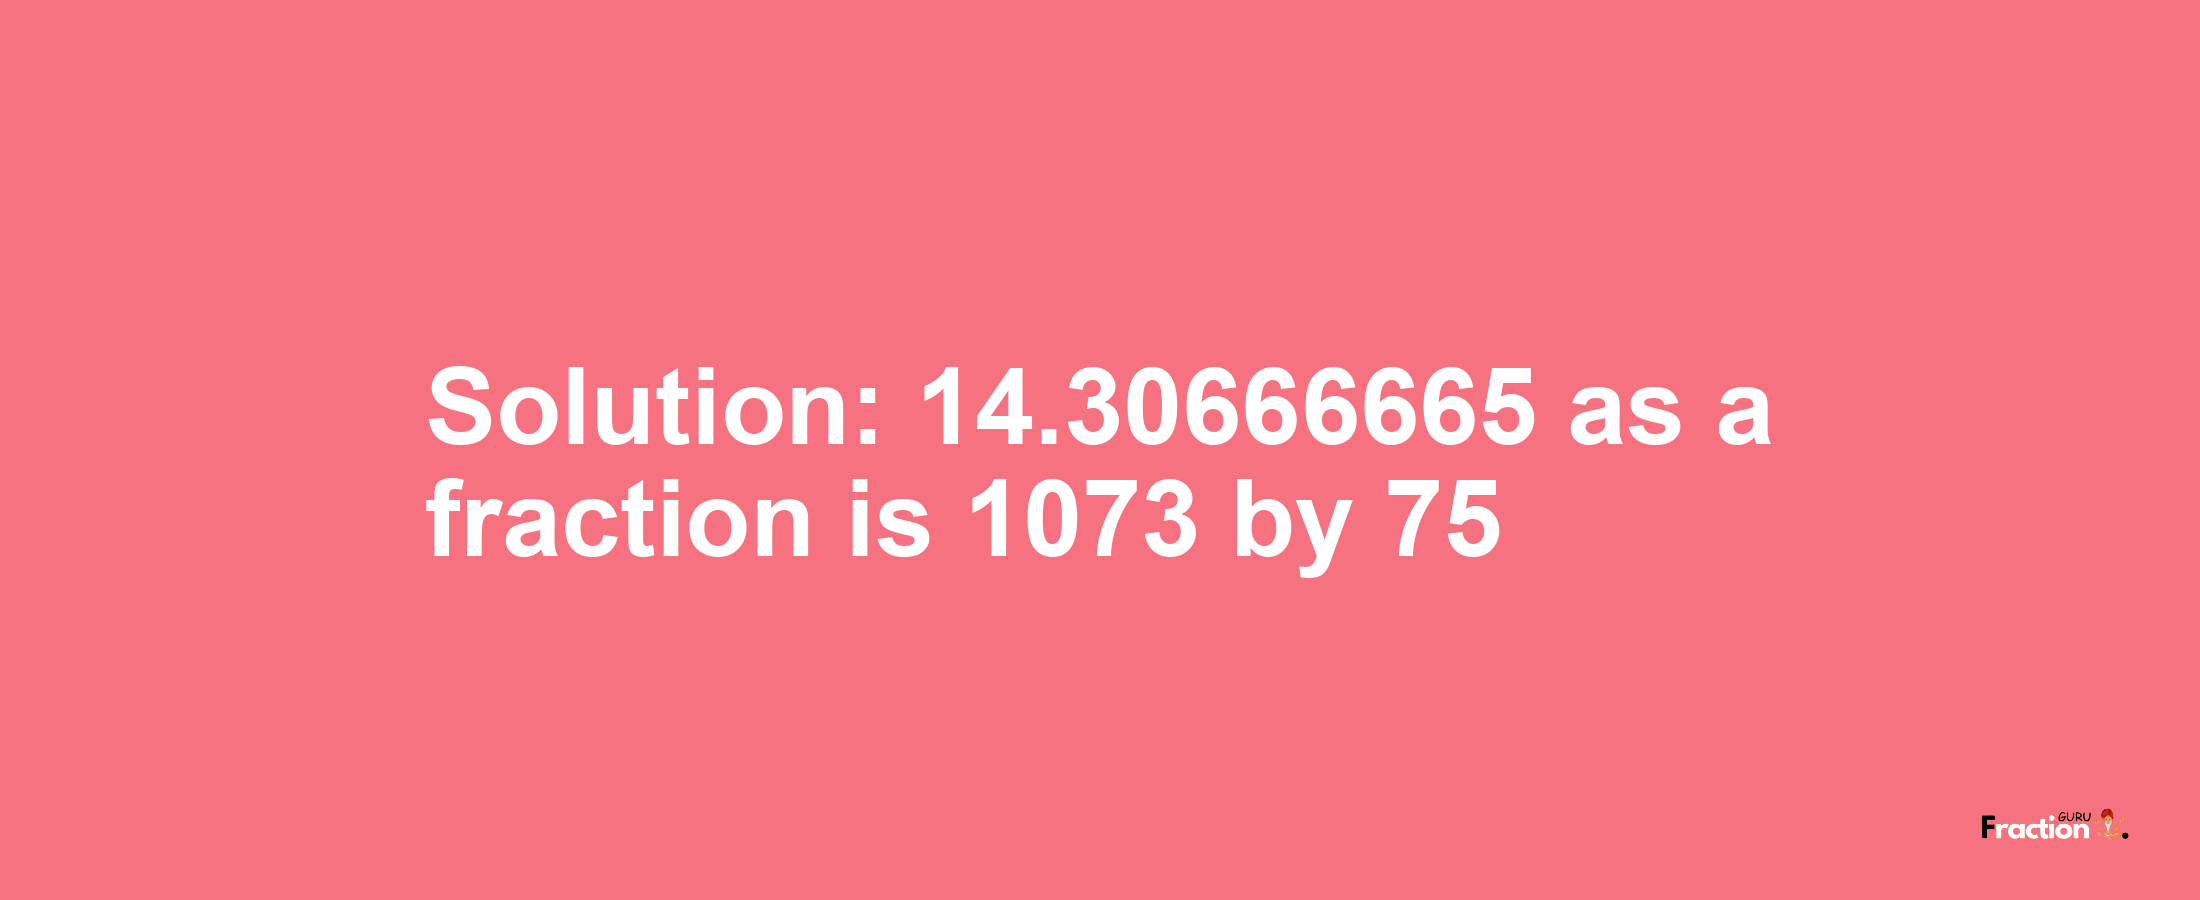 Solution:14.30666665 as a fraction is 1073/75